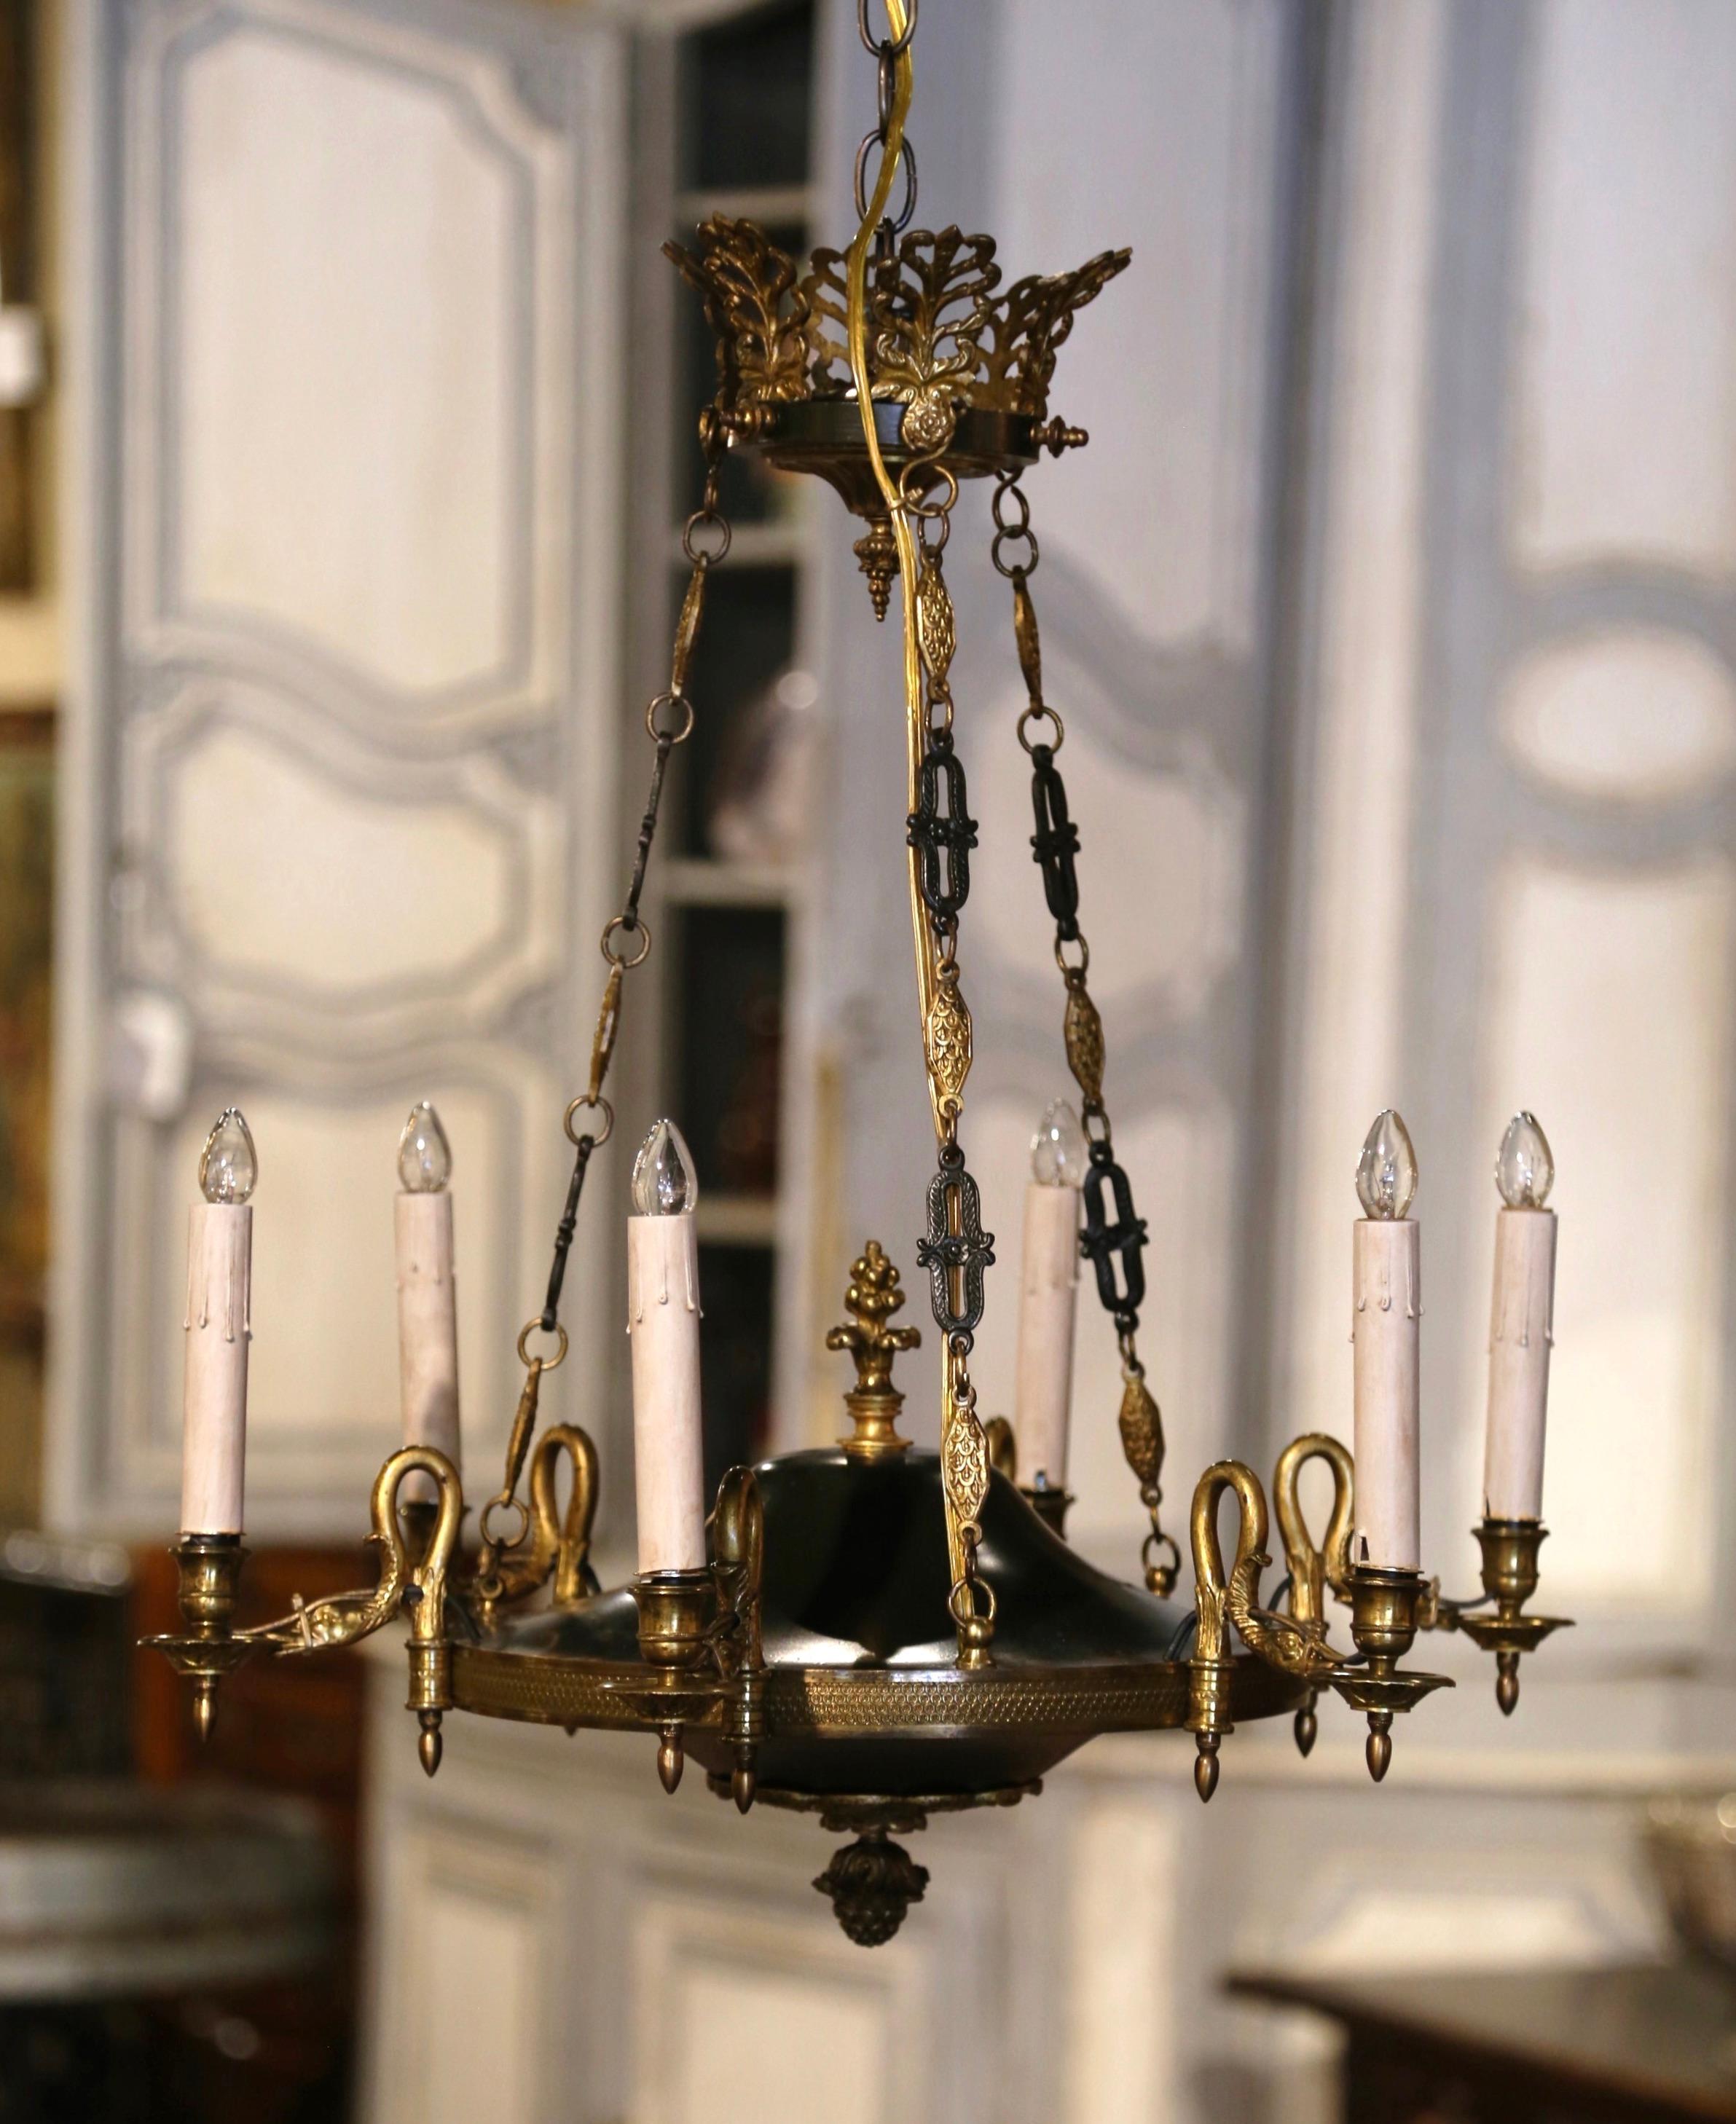 Early 20th Century French Empire Gilt and Patinated Bronze Six-Light Chandelier For Sale 2